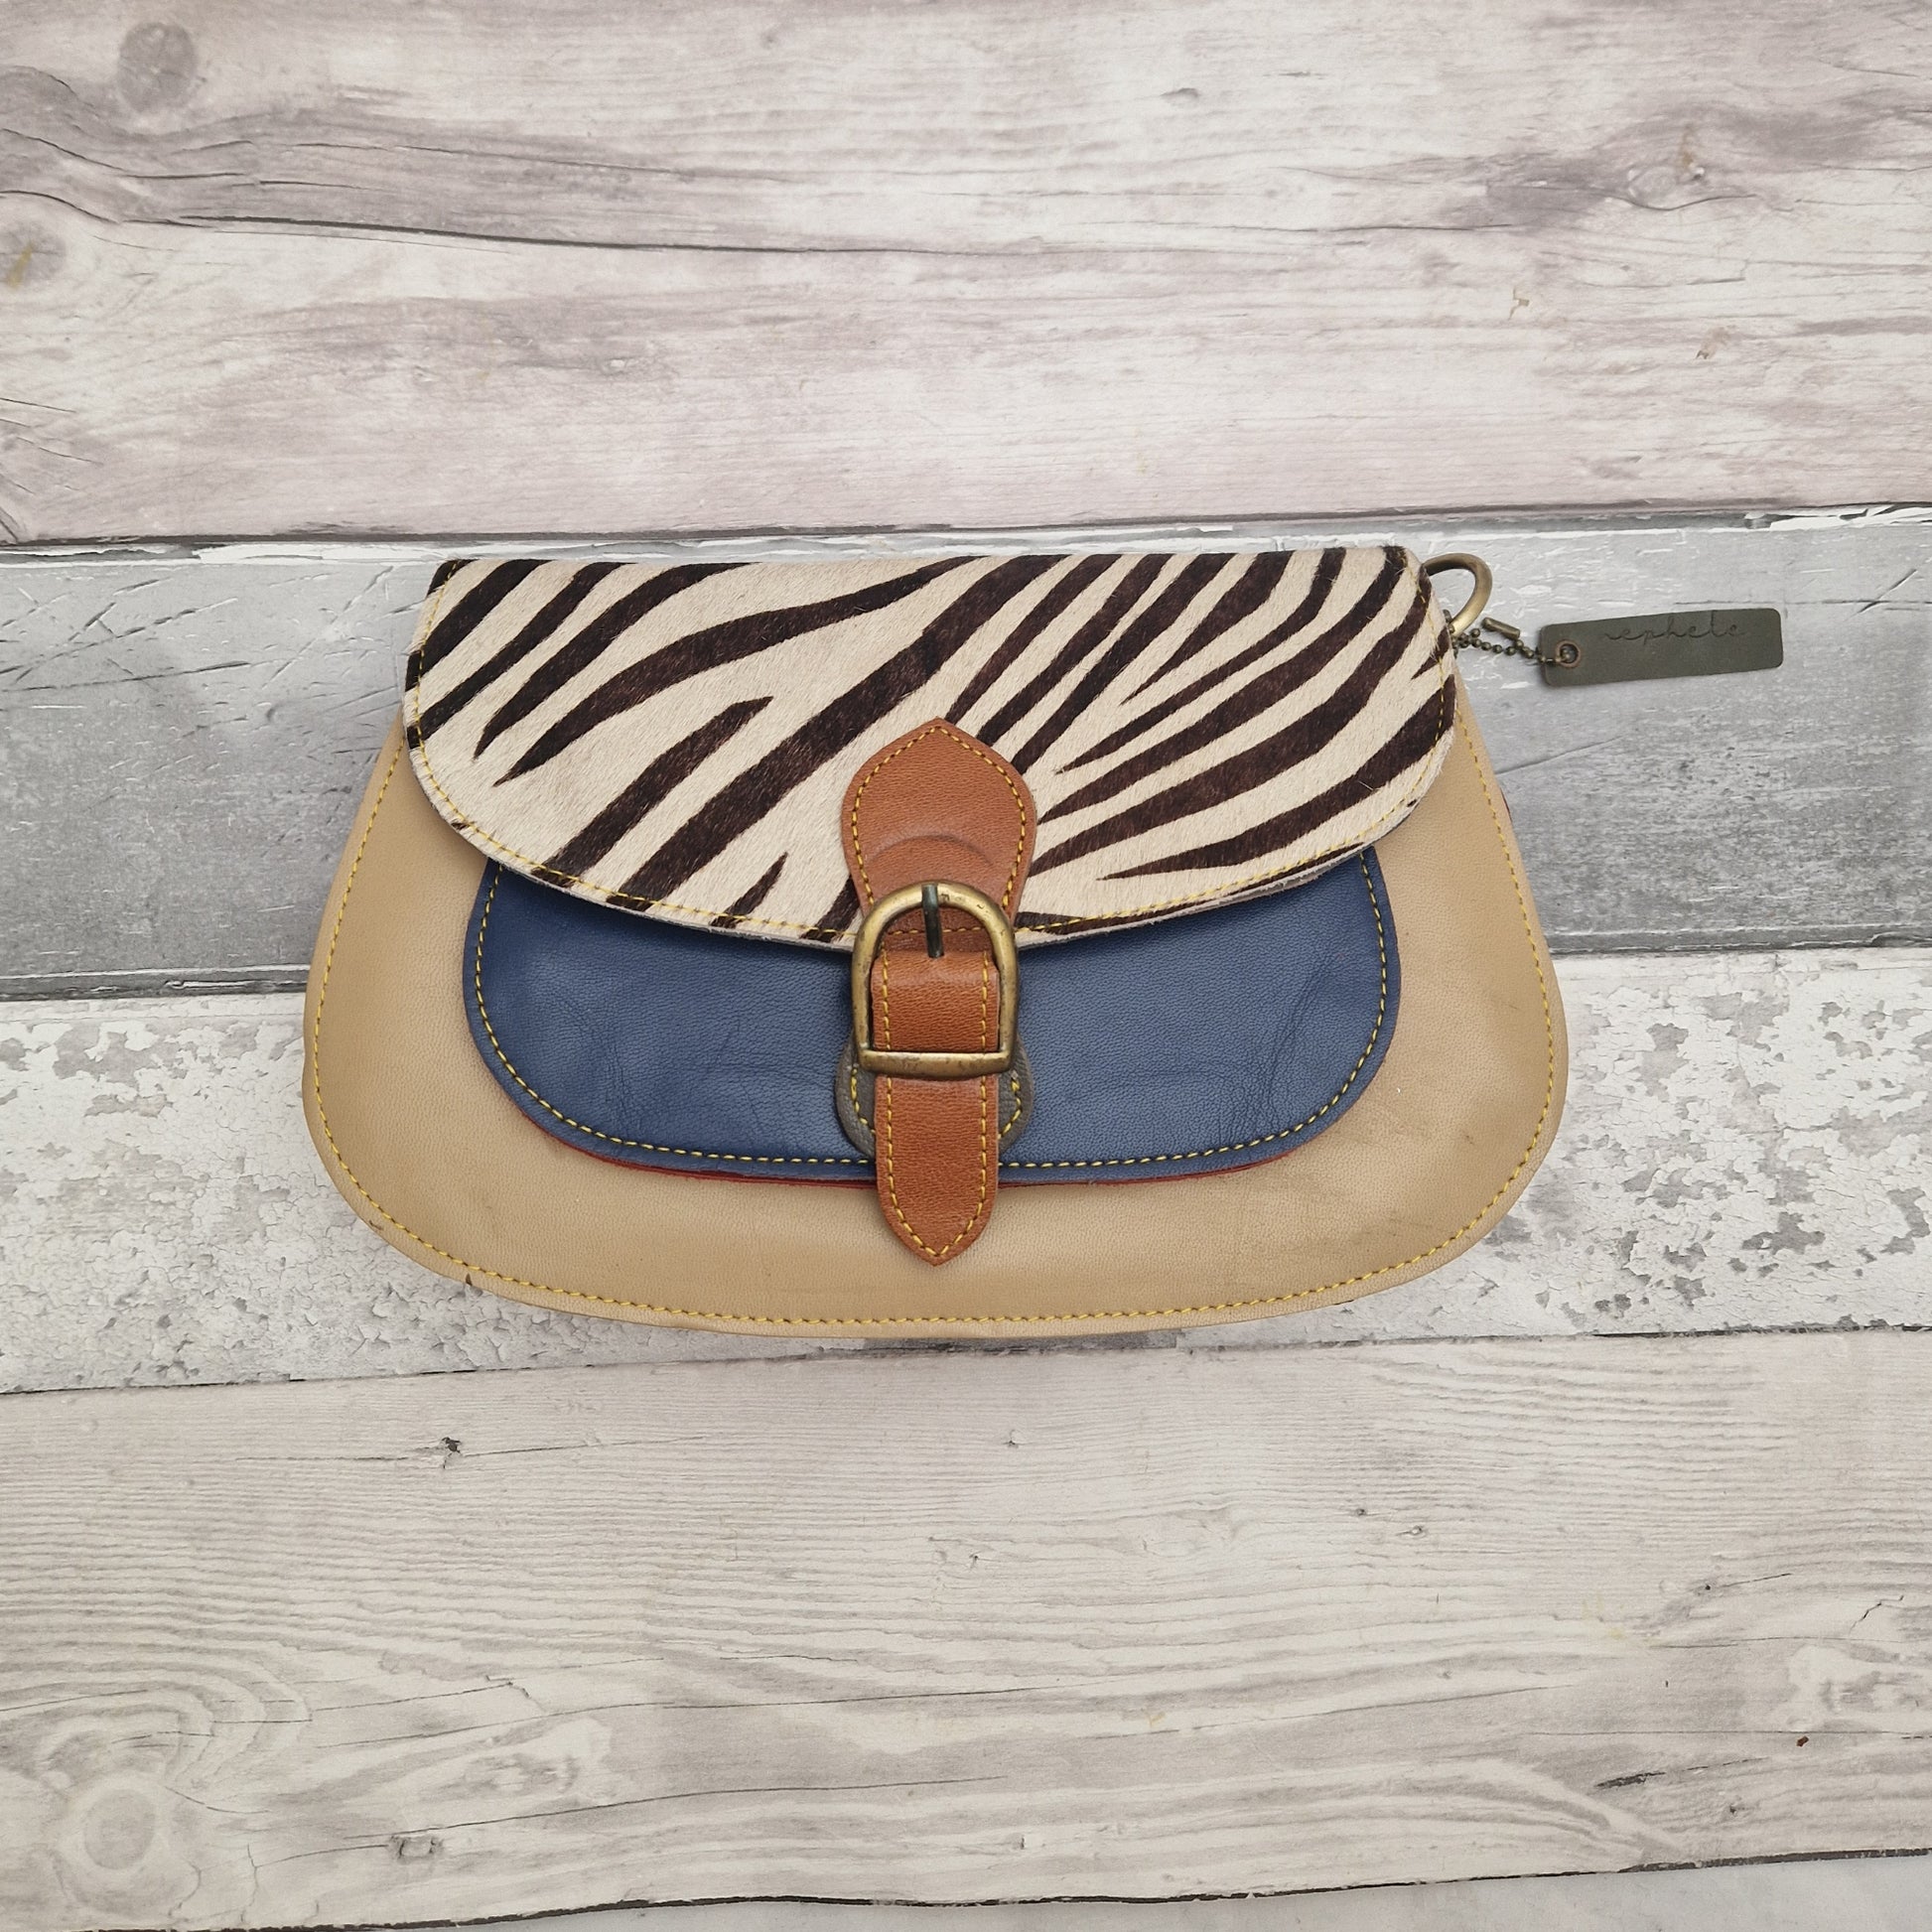 Matte gold leather bag with textured zebra print panel.